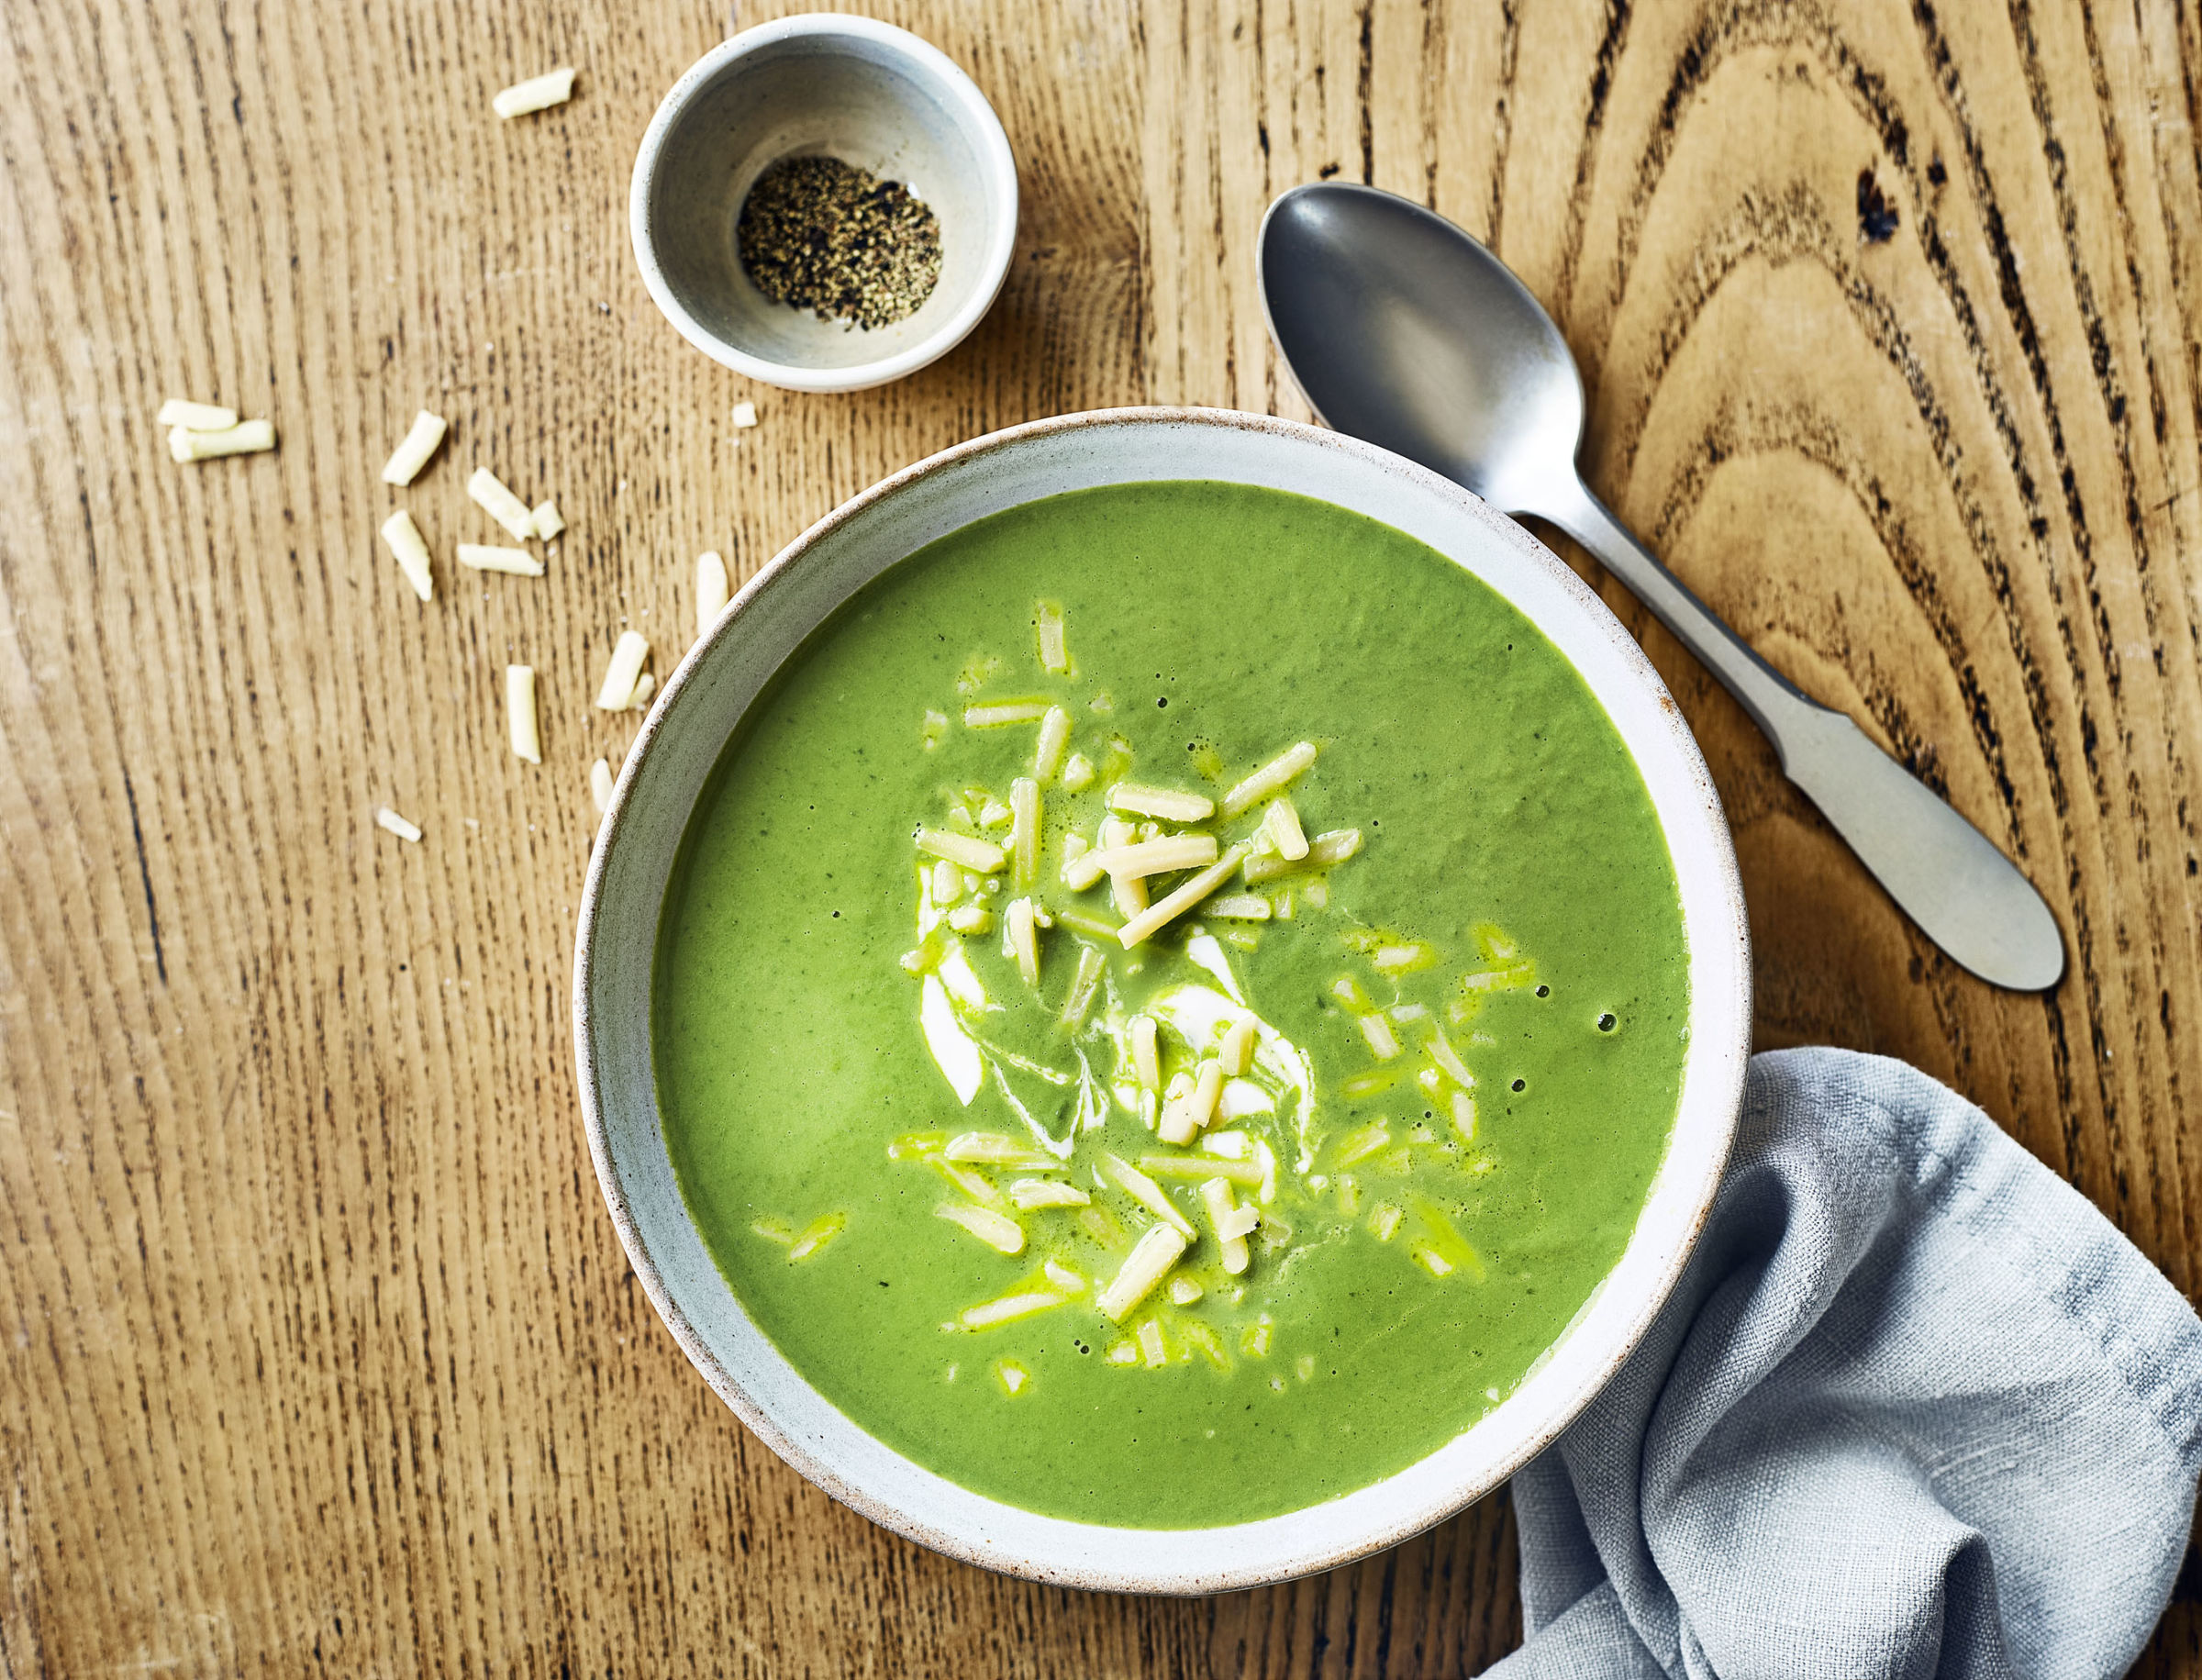 Broccoli and Cheddar Soup / The Body Coach